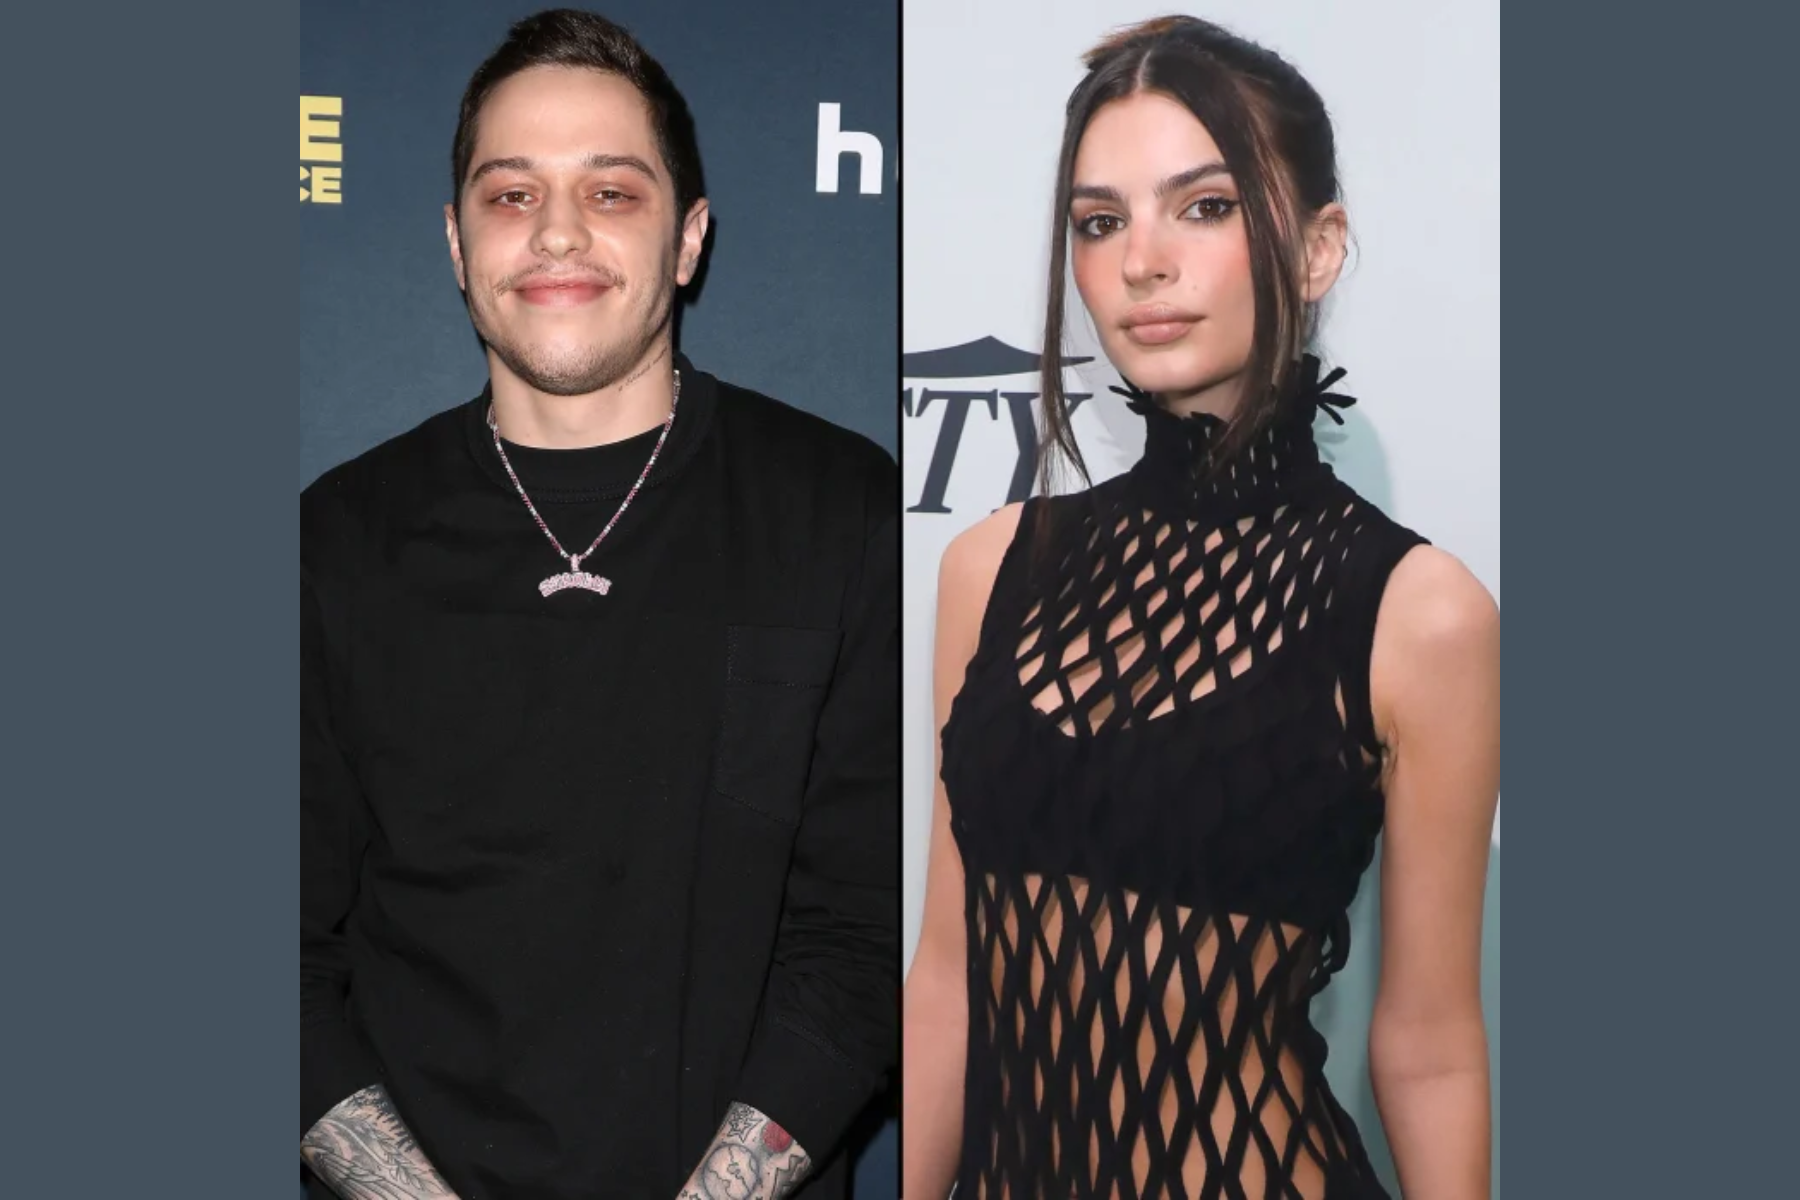 Pete Davidson And Emily Ratajkowski Were Spotted Out Together For The 1st Time Amid Romance